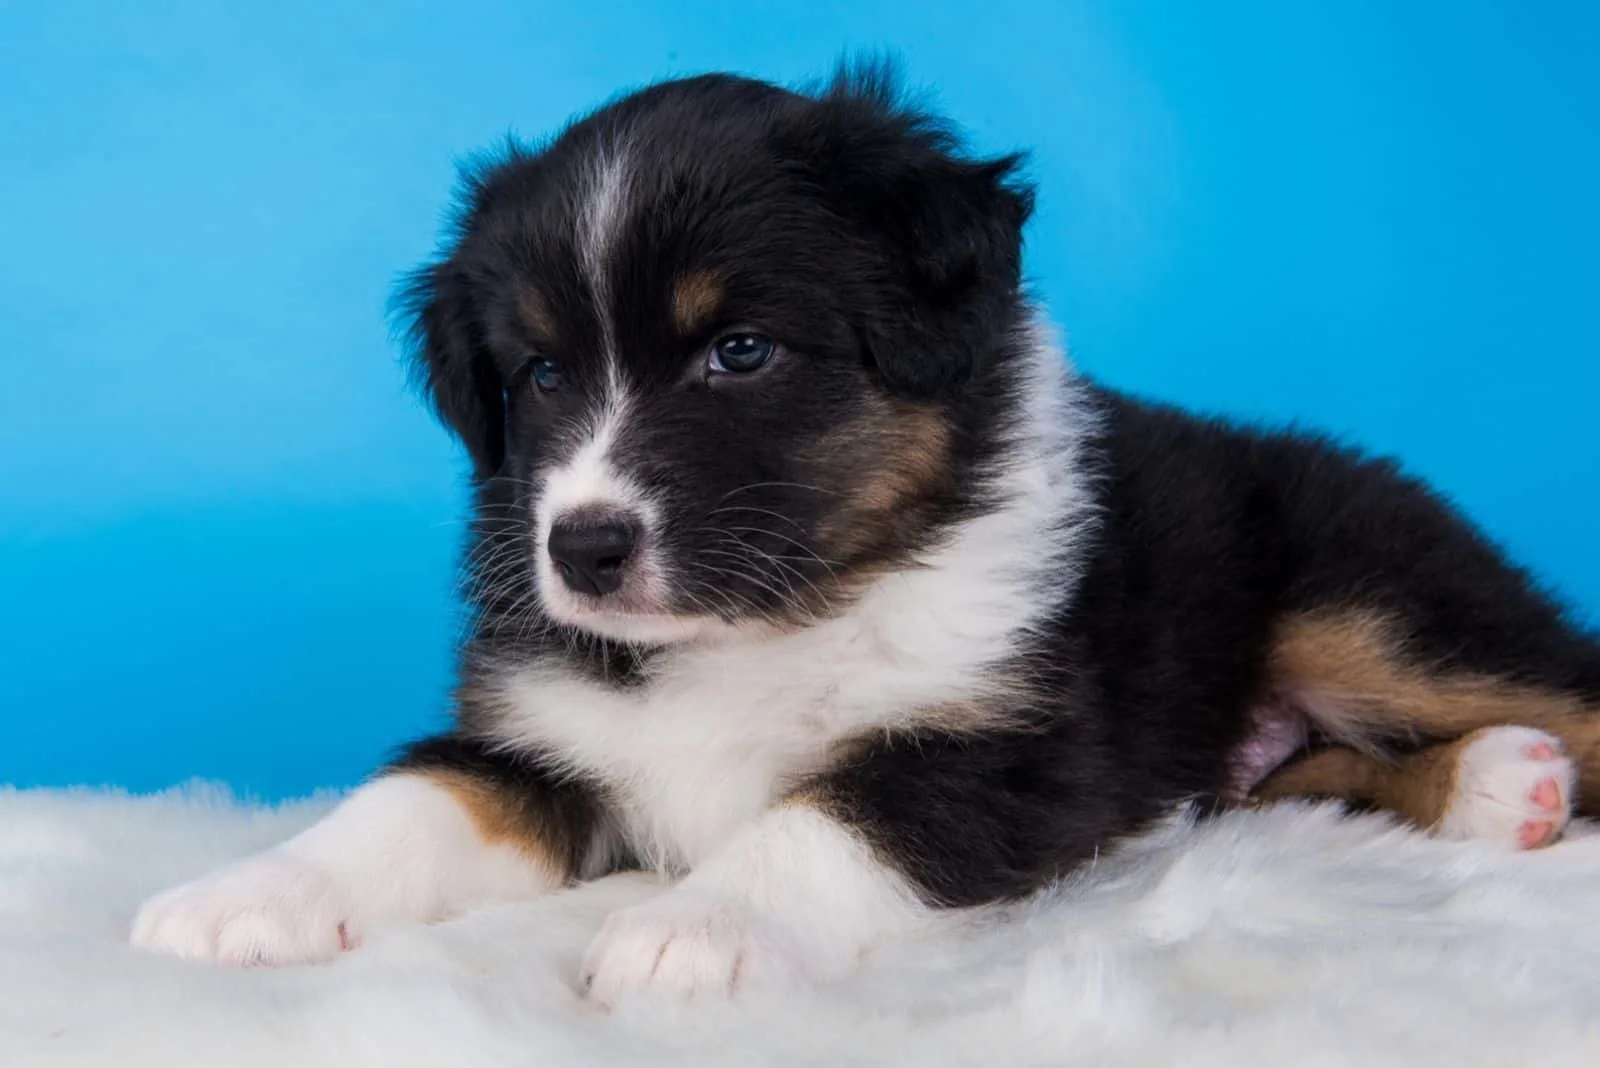 Dog with tri-color black, brown and white six weeks old, sitting on blue background.